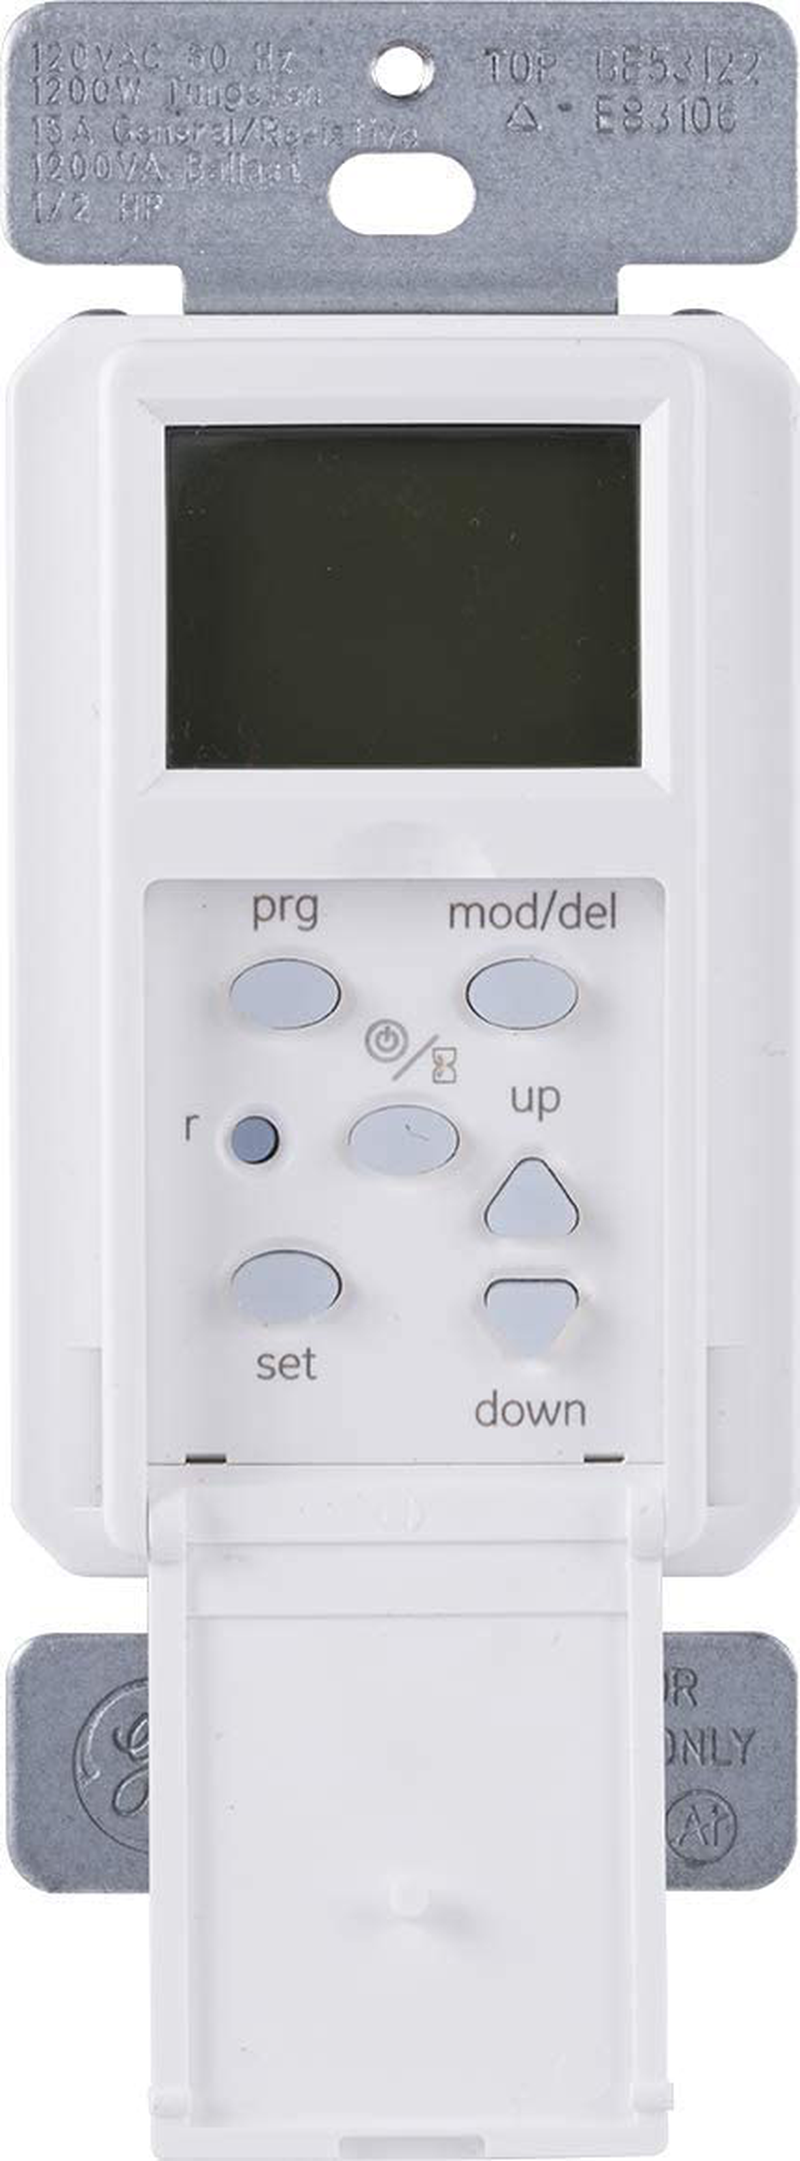 GE SunSmart in-Wall Digital Timer, Daily ON/Off Times, Programmable Settings, Sunset/Sunrise Presets, Vacation Security, White Almond Paddles Included, for Lights, Fans, Heaters 32787 Home & Garden > Lighting Accessories > Lighting Timers Jasco   